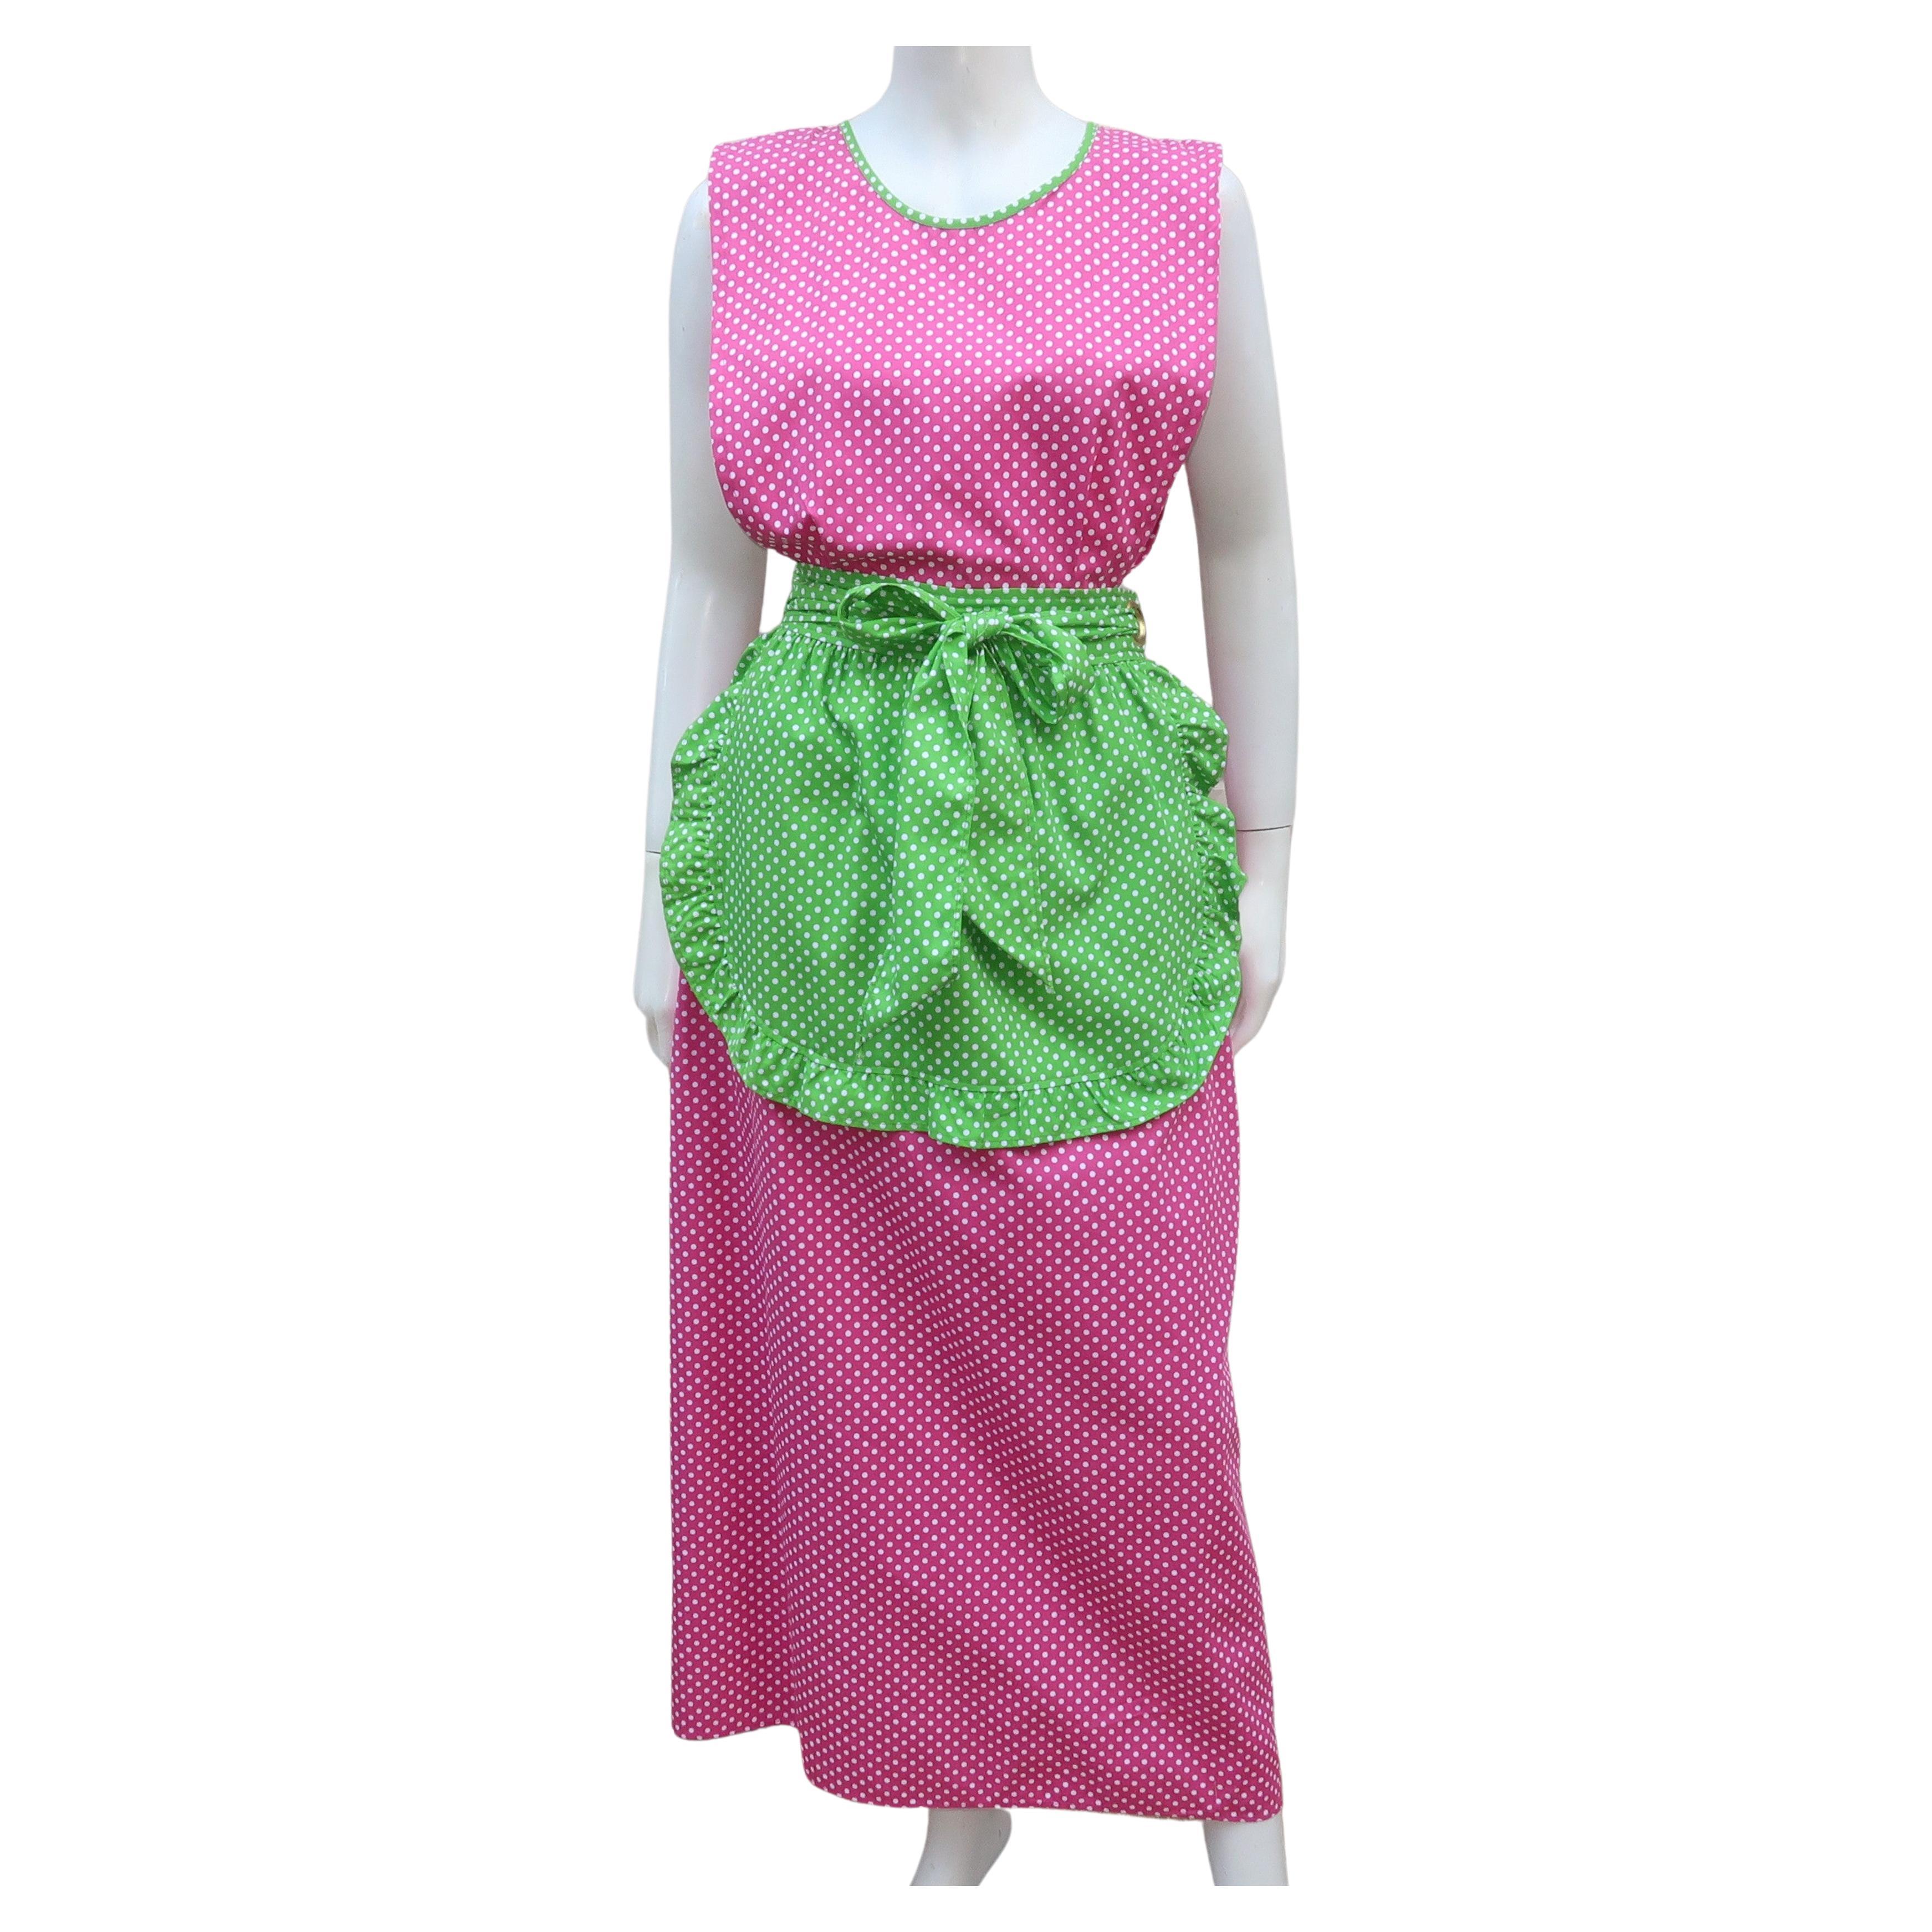 Design House Pink & Green Cotton Pinafore Apron Dress, C.1970 For Sale